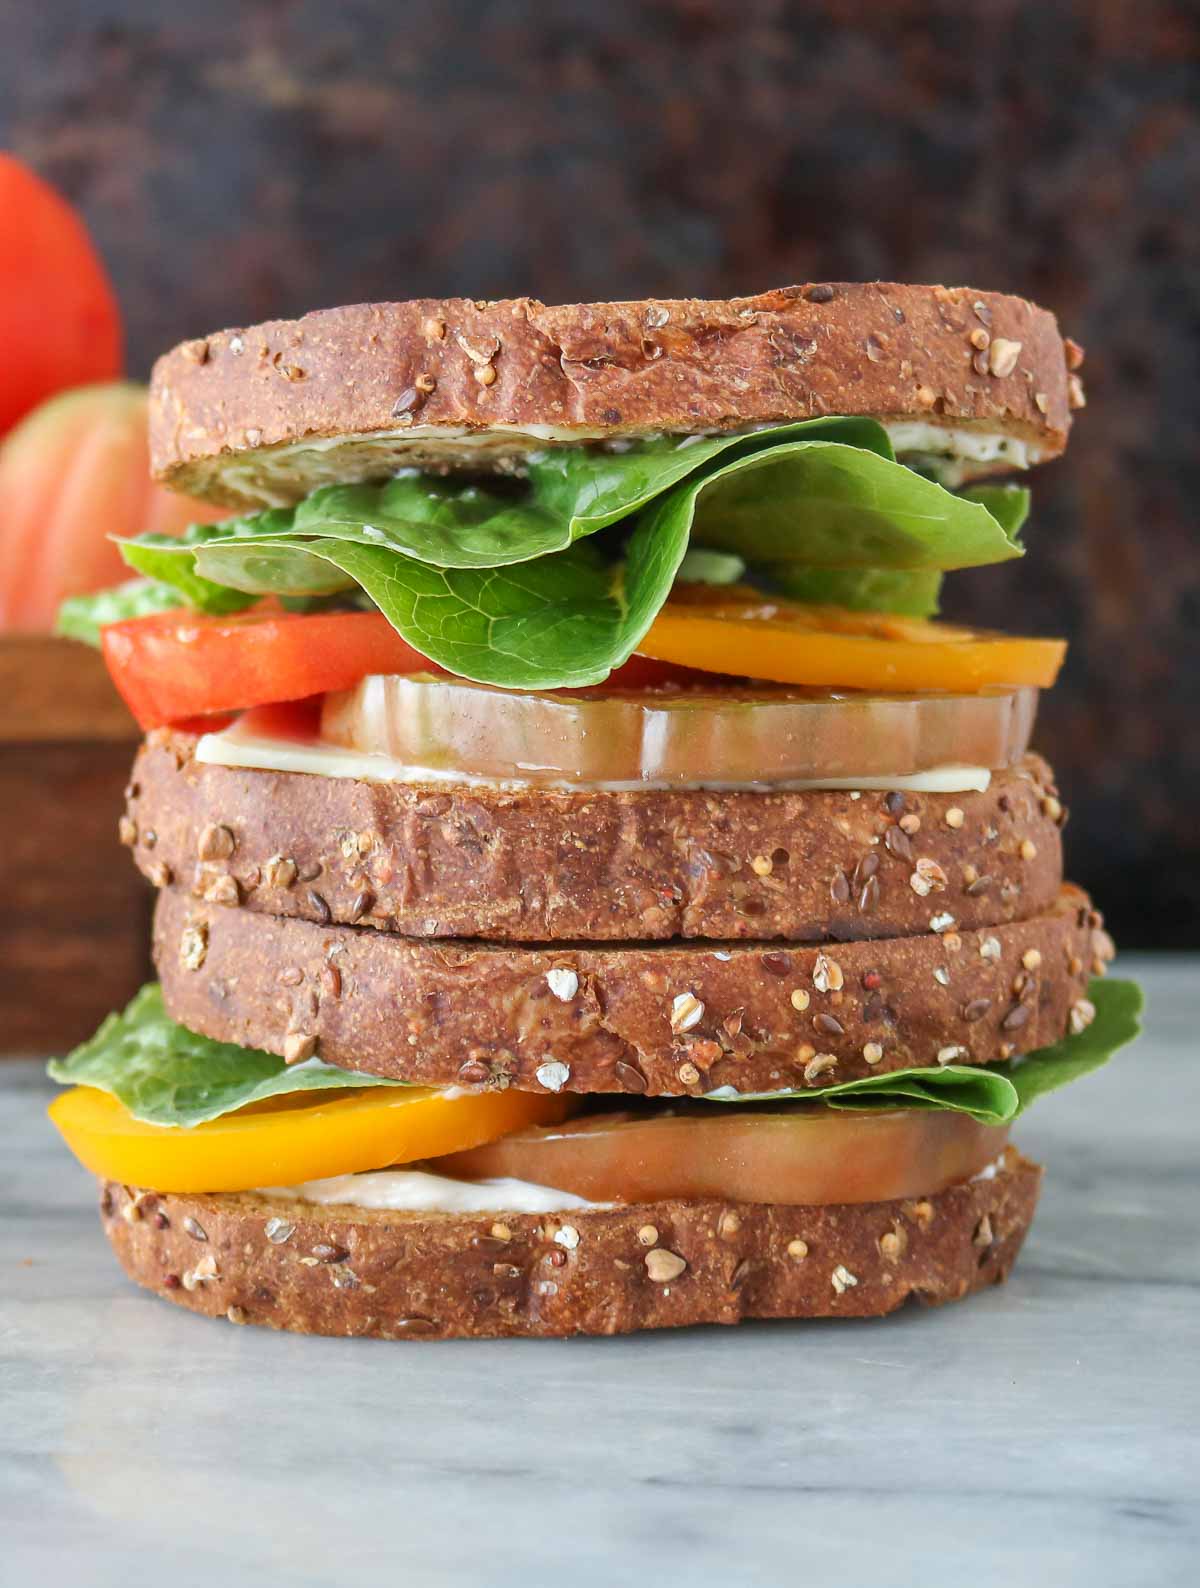 Stack of two toasted heirloom tomato sandwiches.